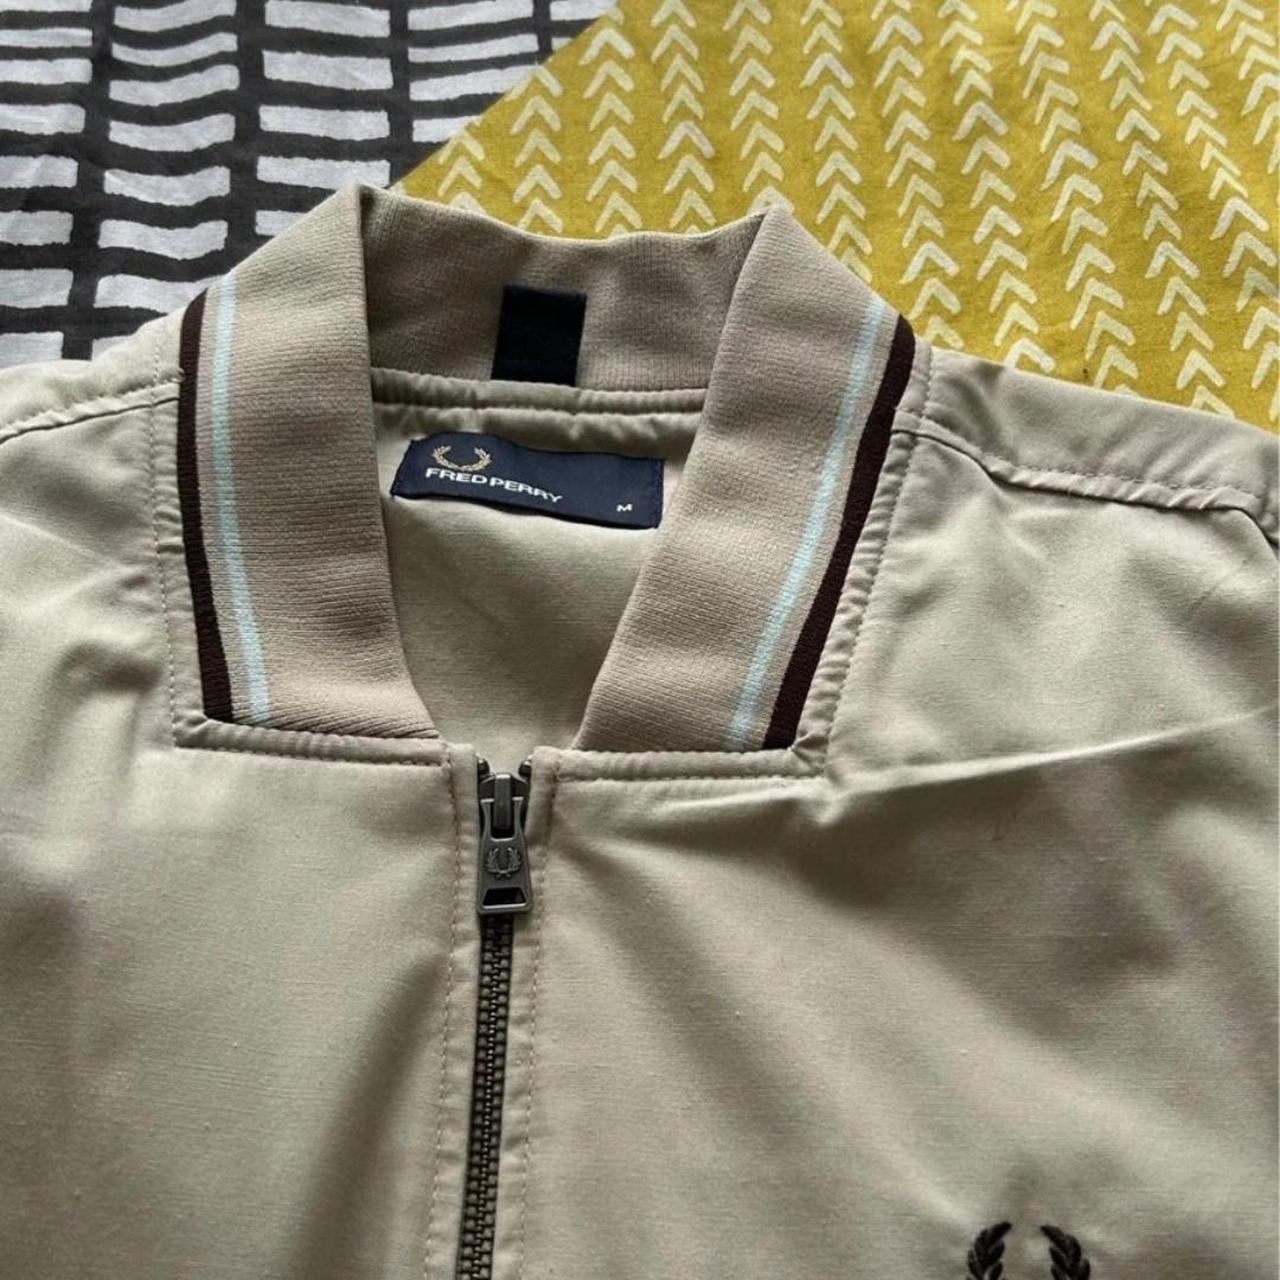 Immaculate Fred Perry bomber jacket. Rrp £160... - Depop